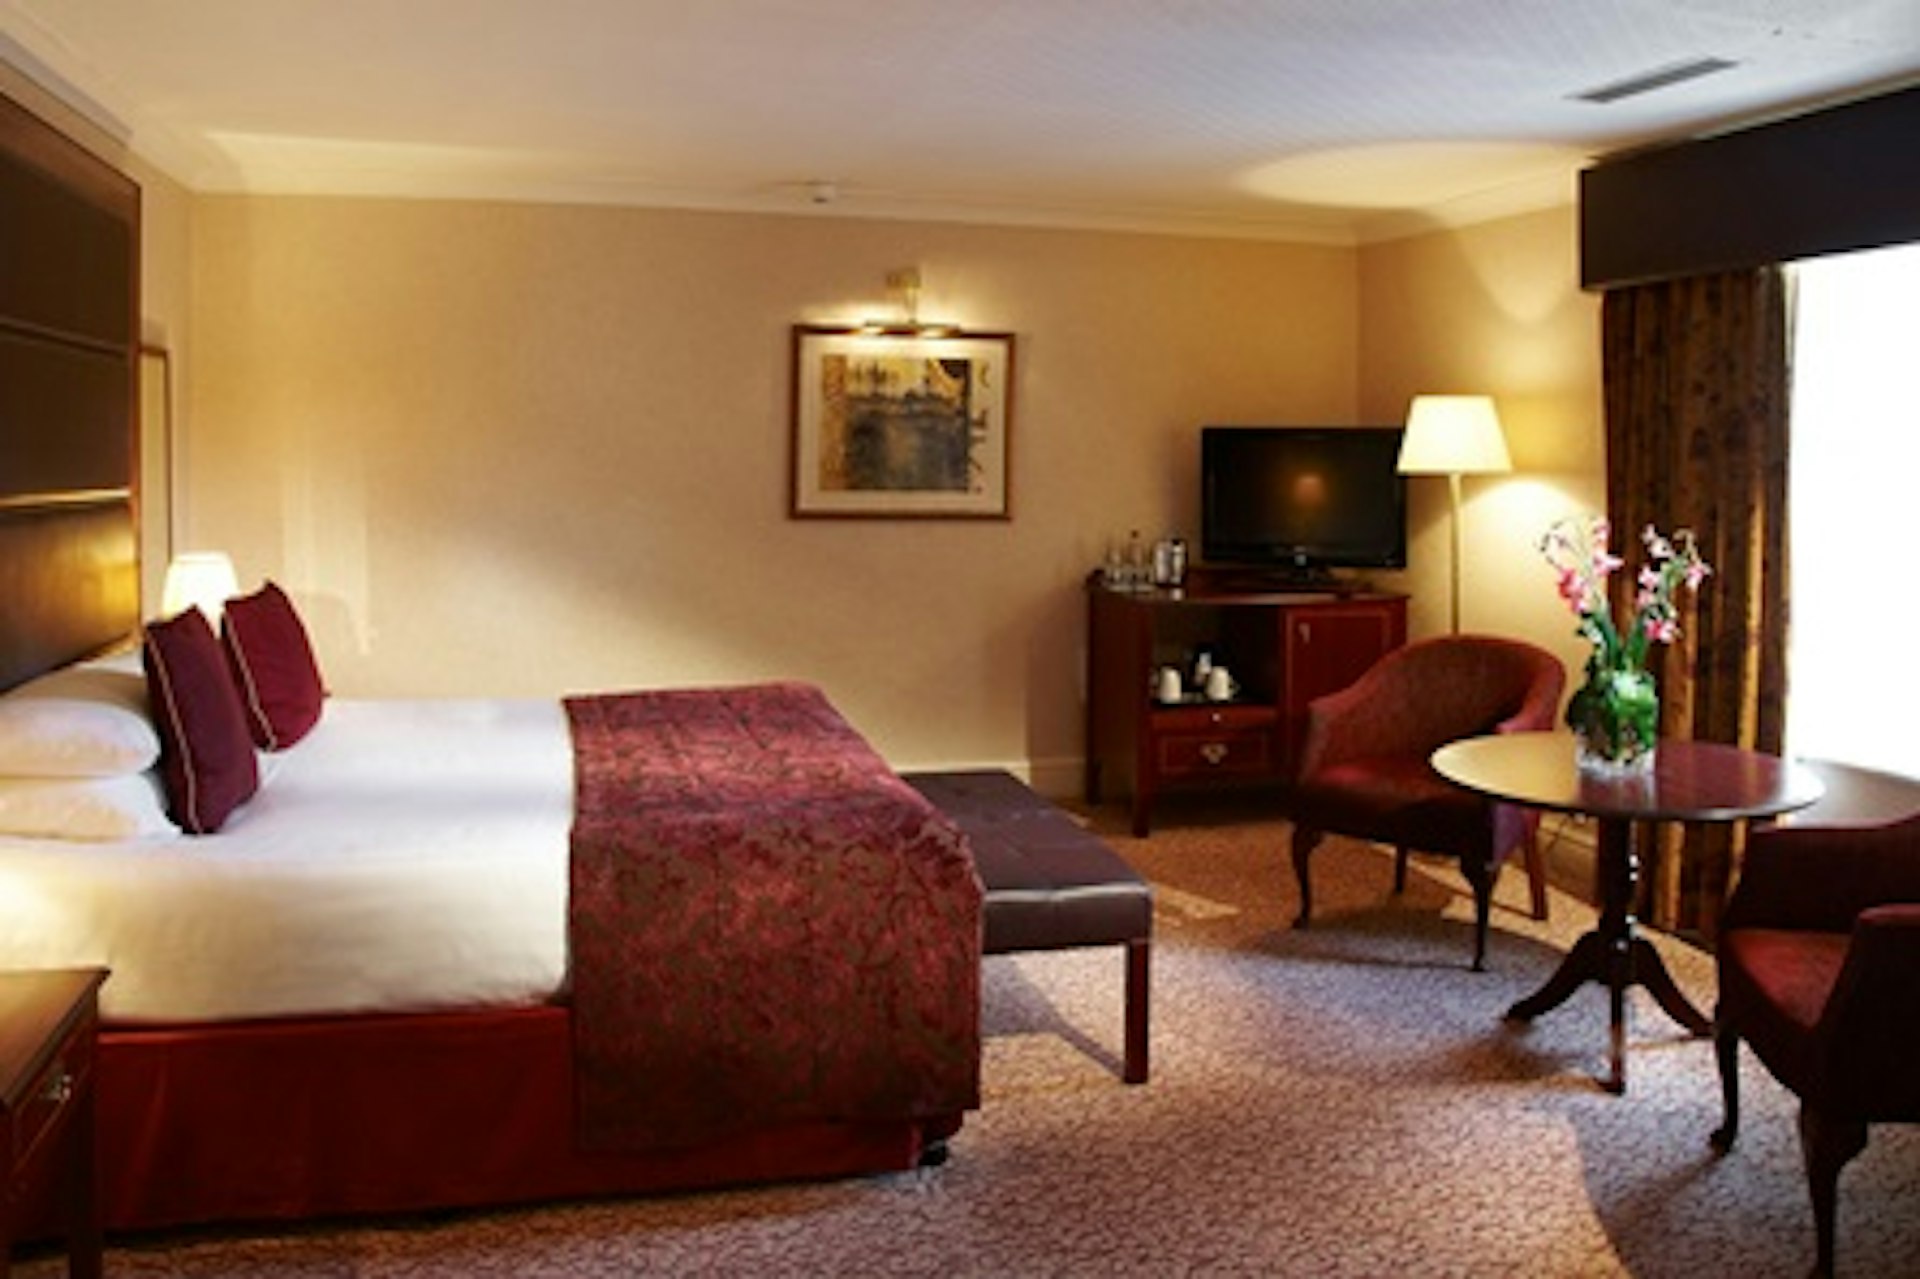 One Night Peak District Break with Dinner for Two at The Shrigley Hall Hotel & Spa 1